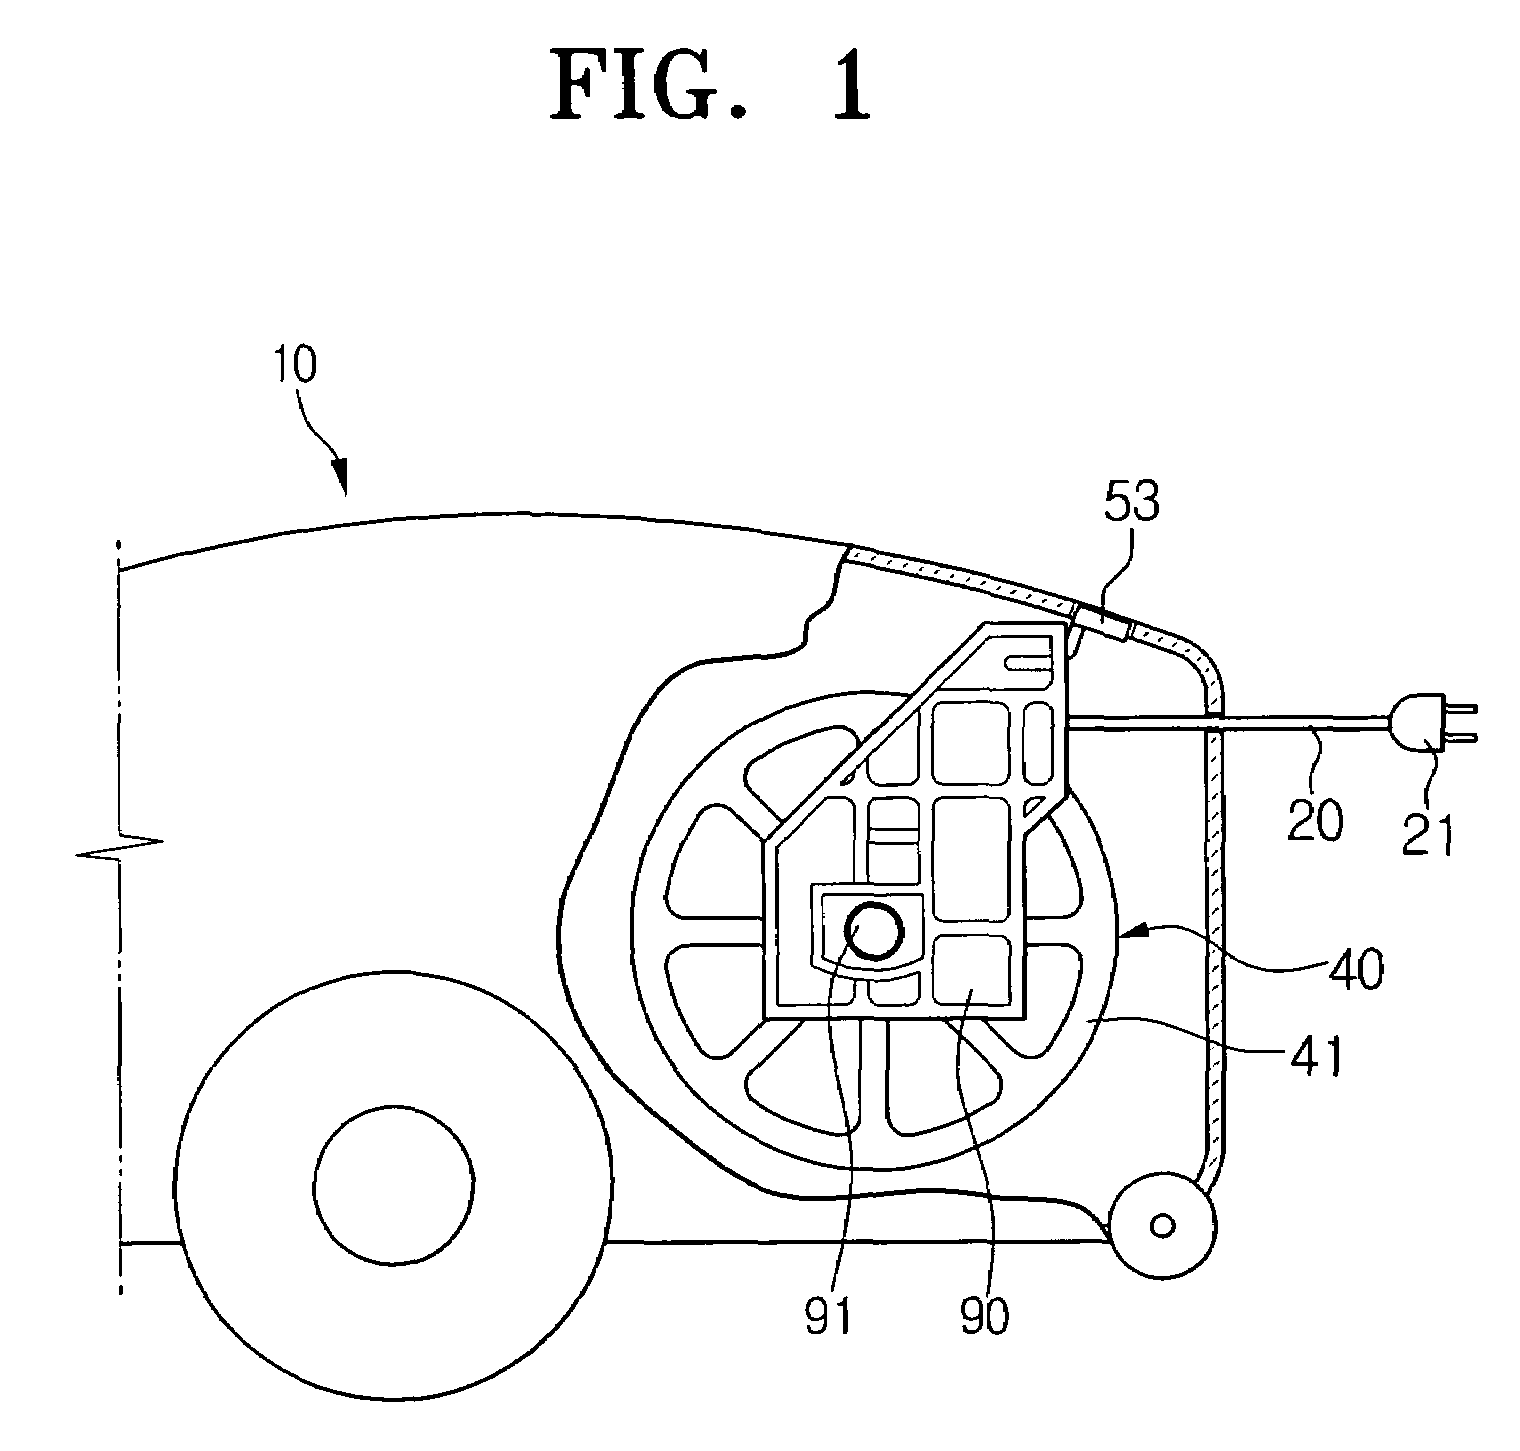 Cord-reel assembly for electronic devices